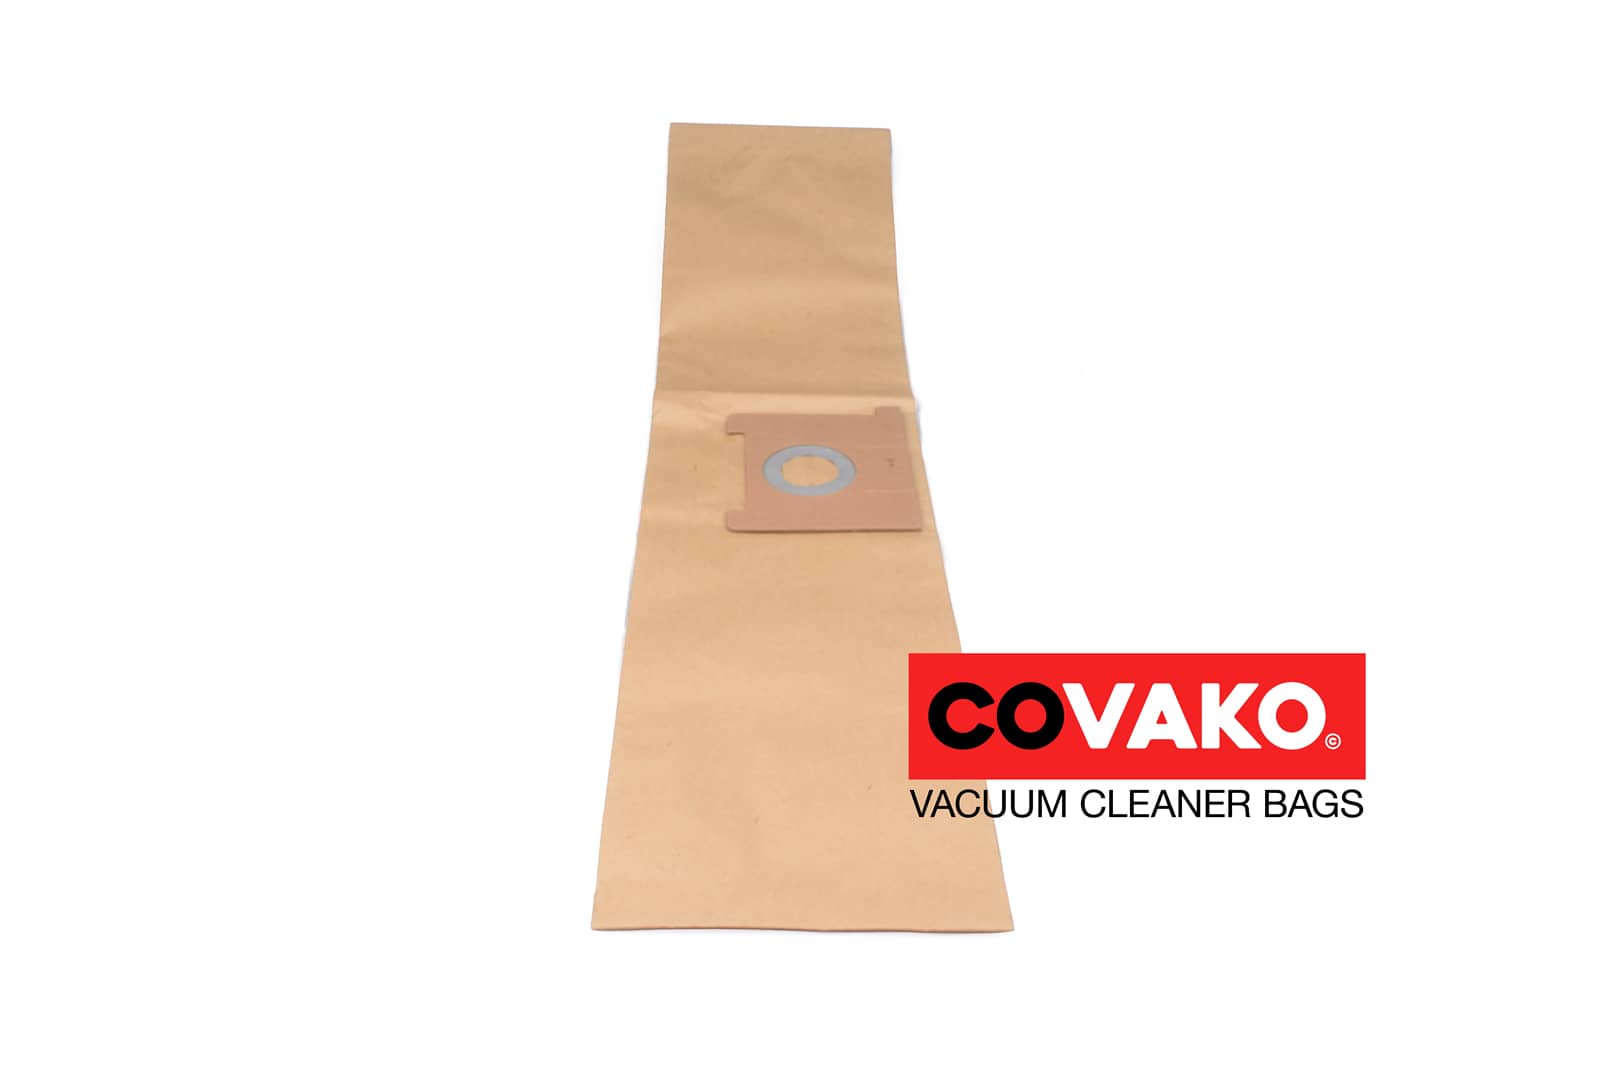 Oehme Otto Compacto 9 / Paper - Oehme Otto vacuum cleaner bags